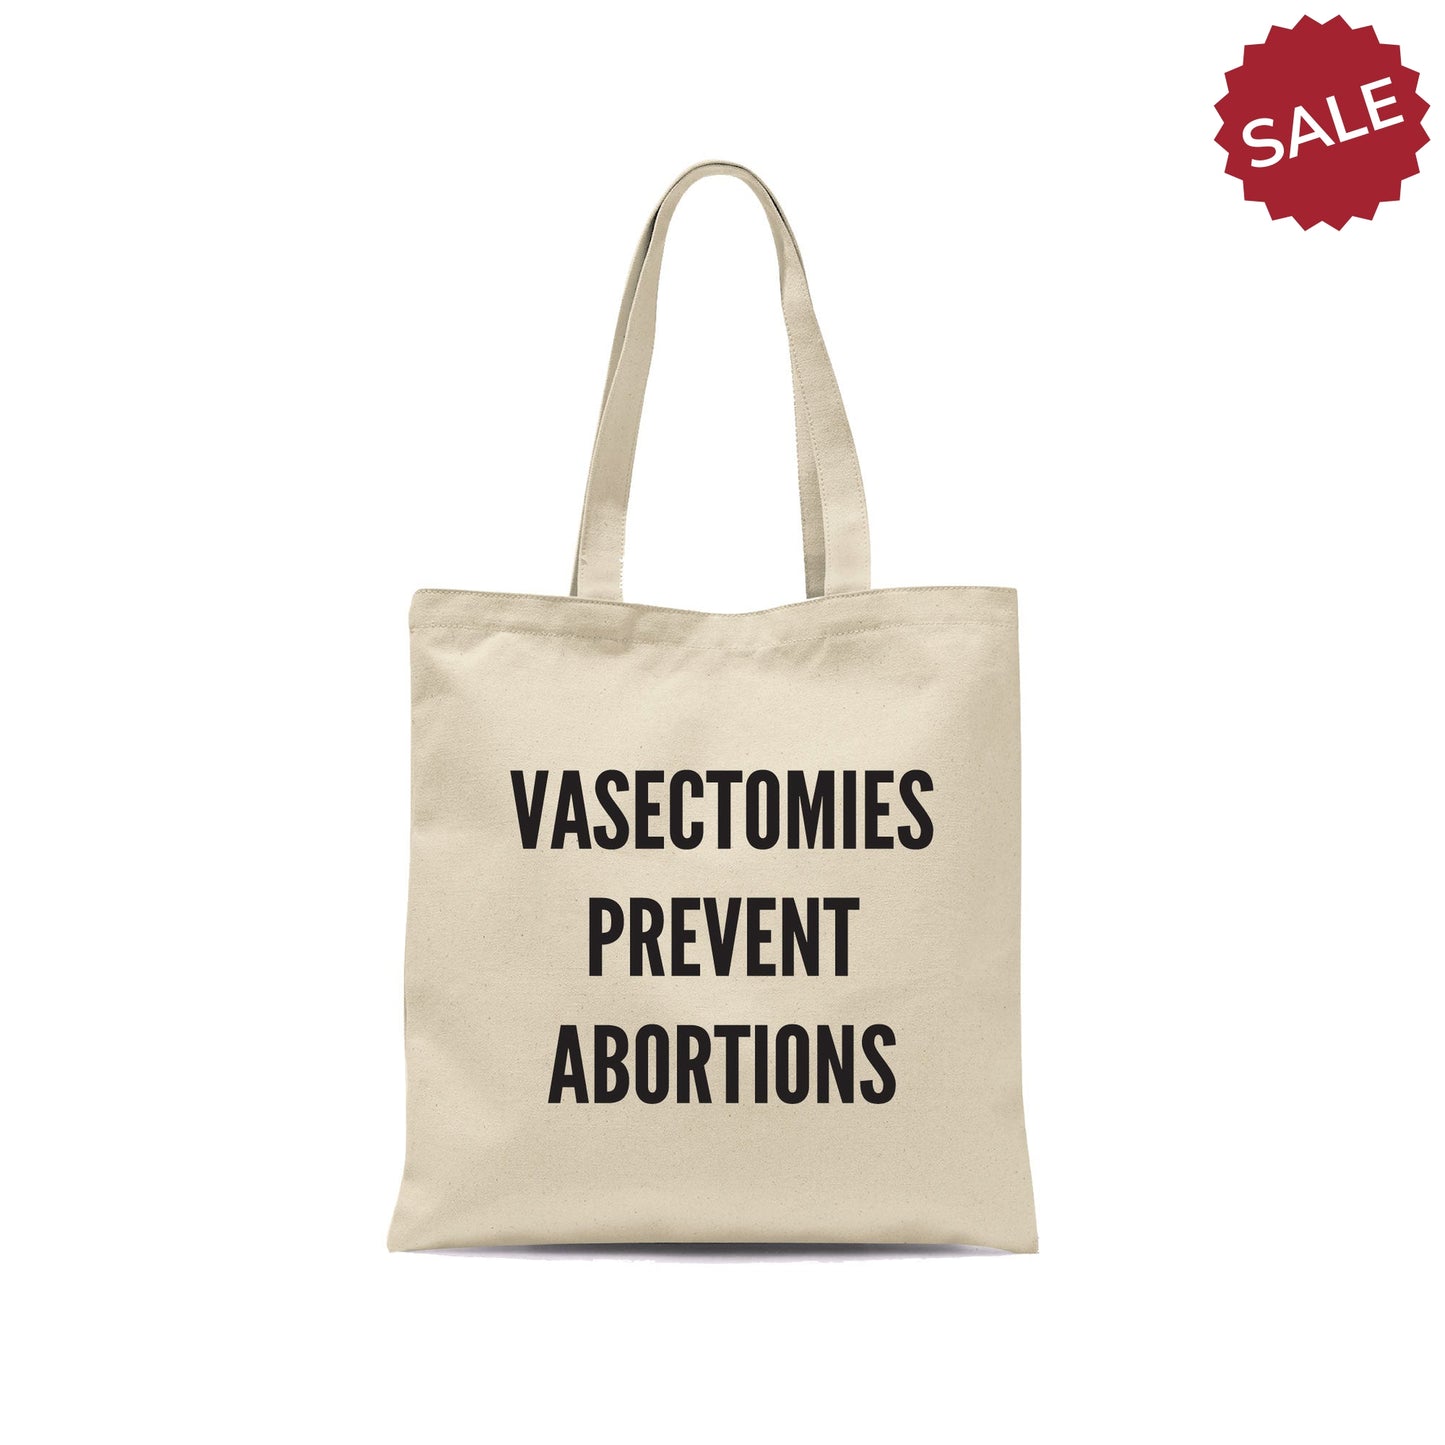 SLIGHTLY DAMAGED - Vasectomies Prevent Abortions Tote Bag-Totes-Crimson and Clover Studio